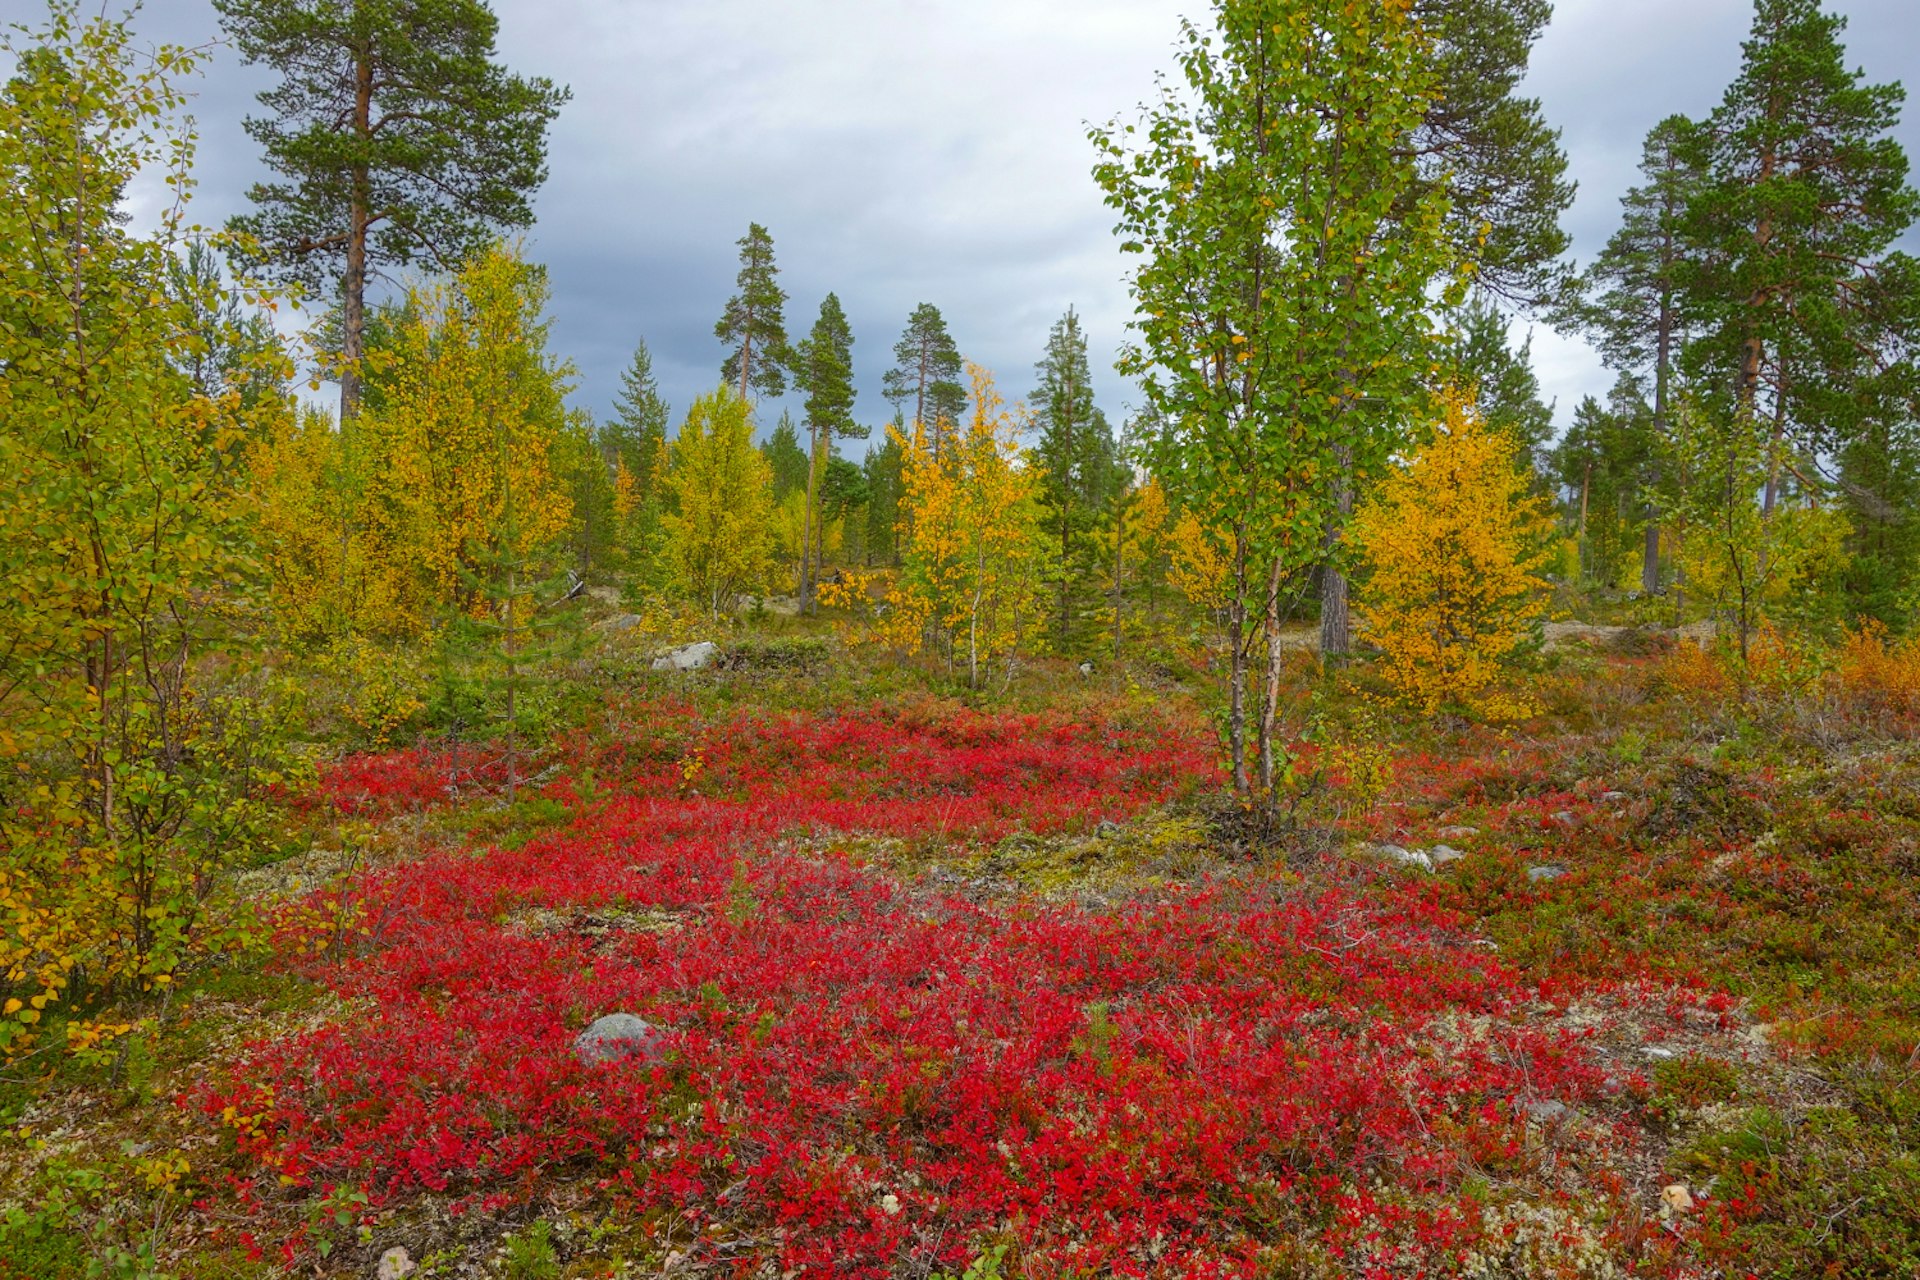 A pop of red flowers carpets the forest floor as green leaves slowly transition to yellow in a forest in Finland in autumn